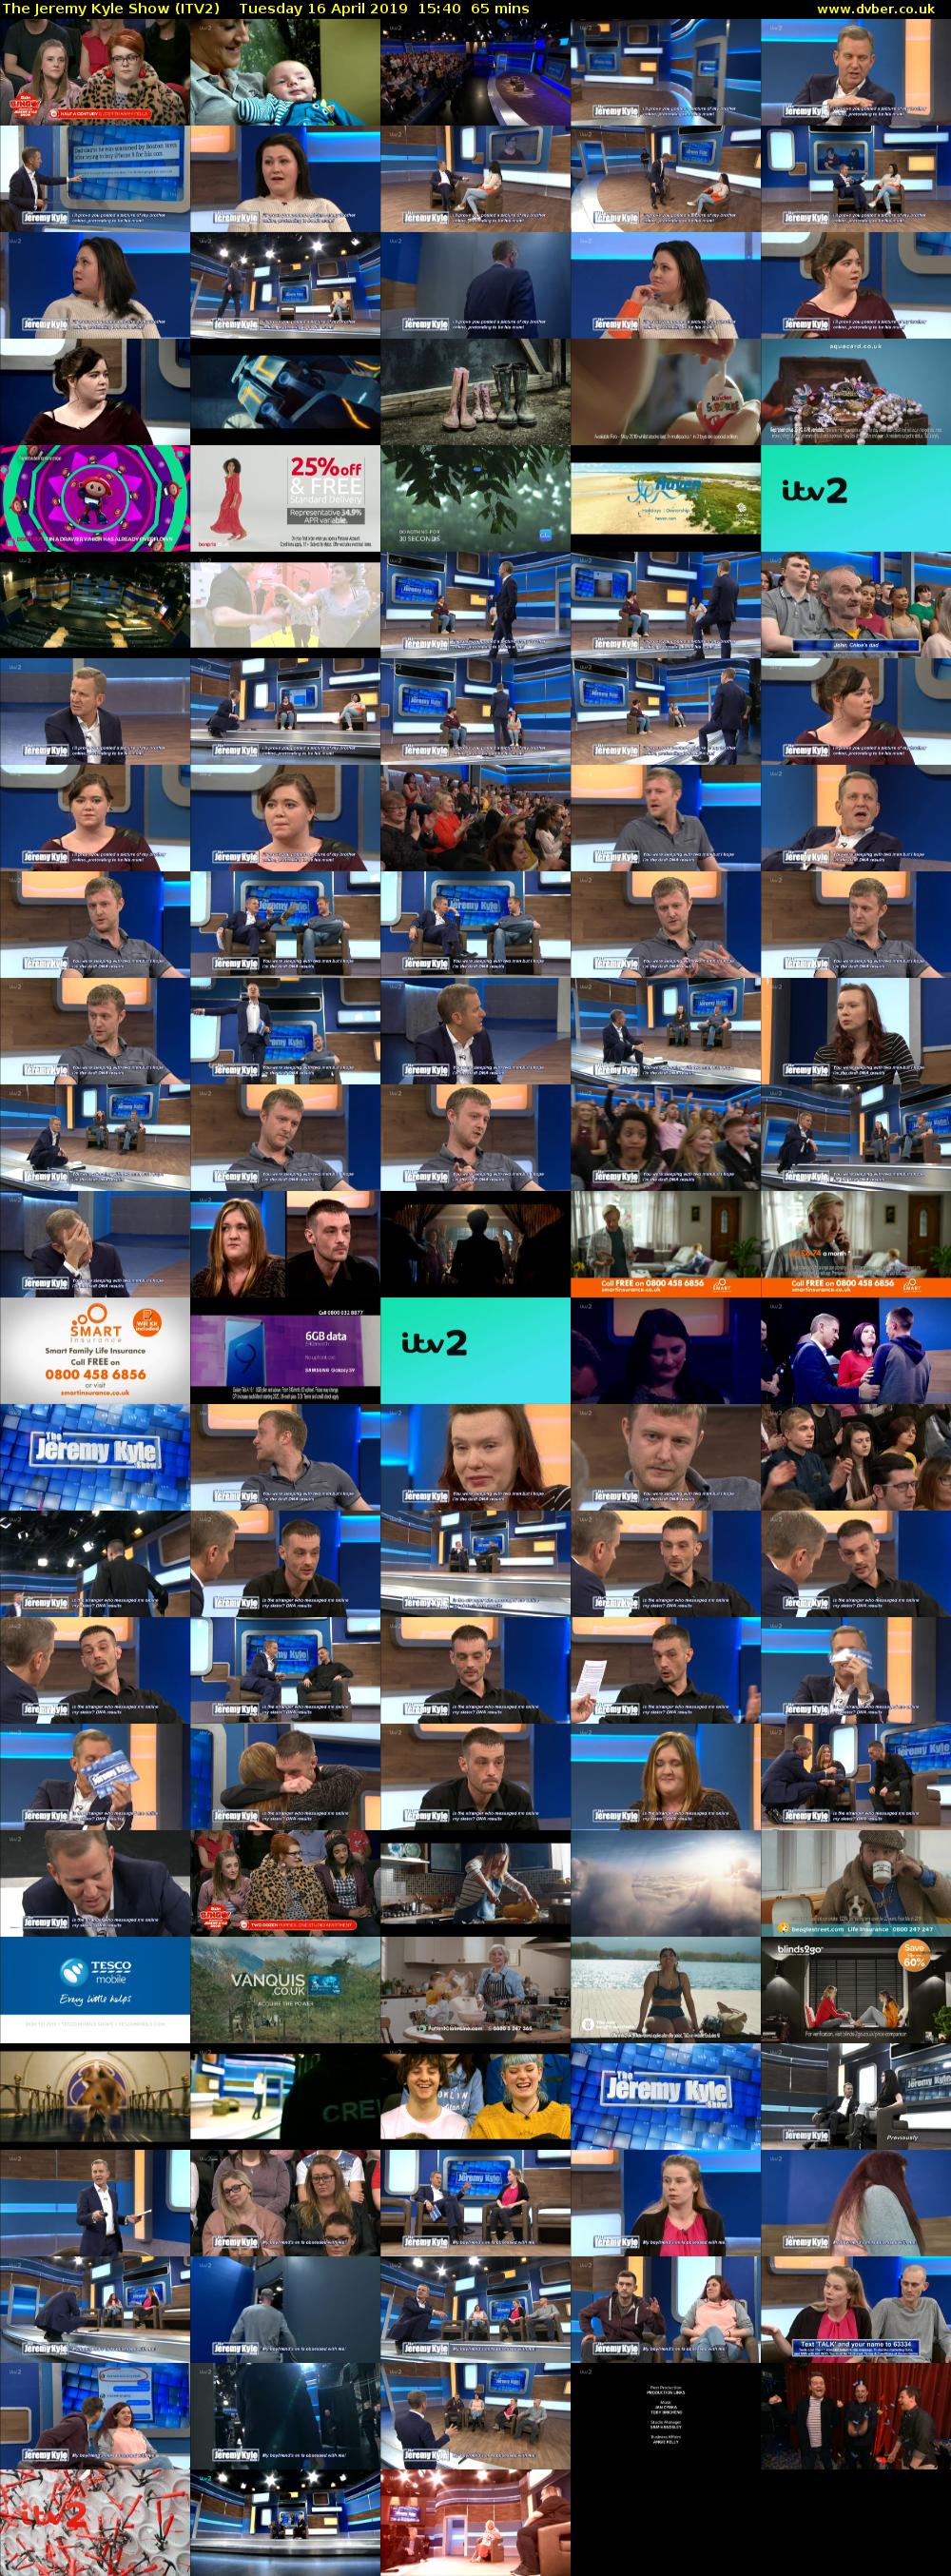 The Jeremy Kyle Show (ITV2) Tuesday 16 April 2019 15:40 - 16:45